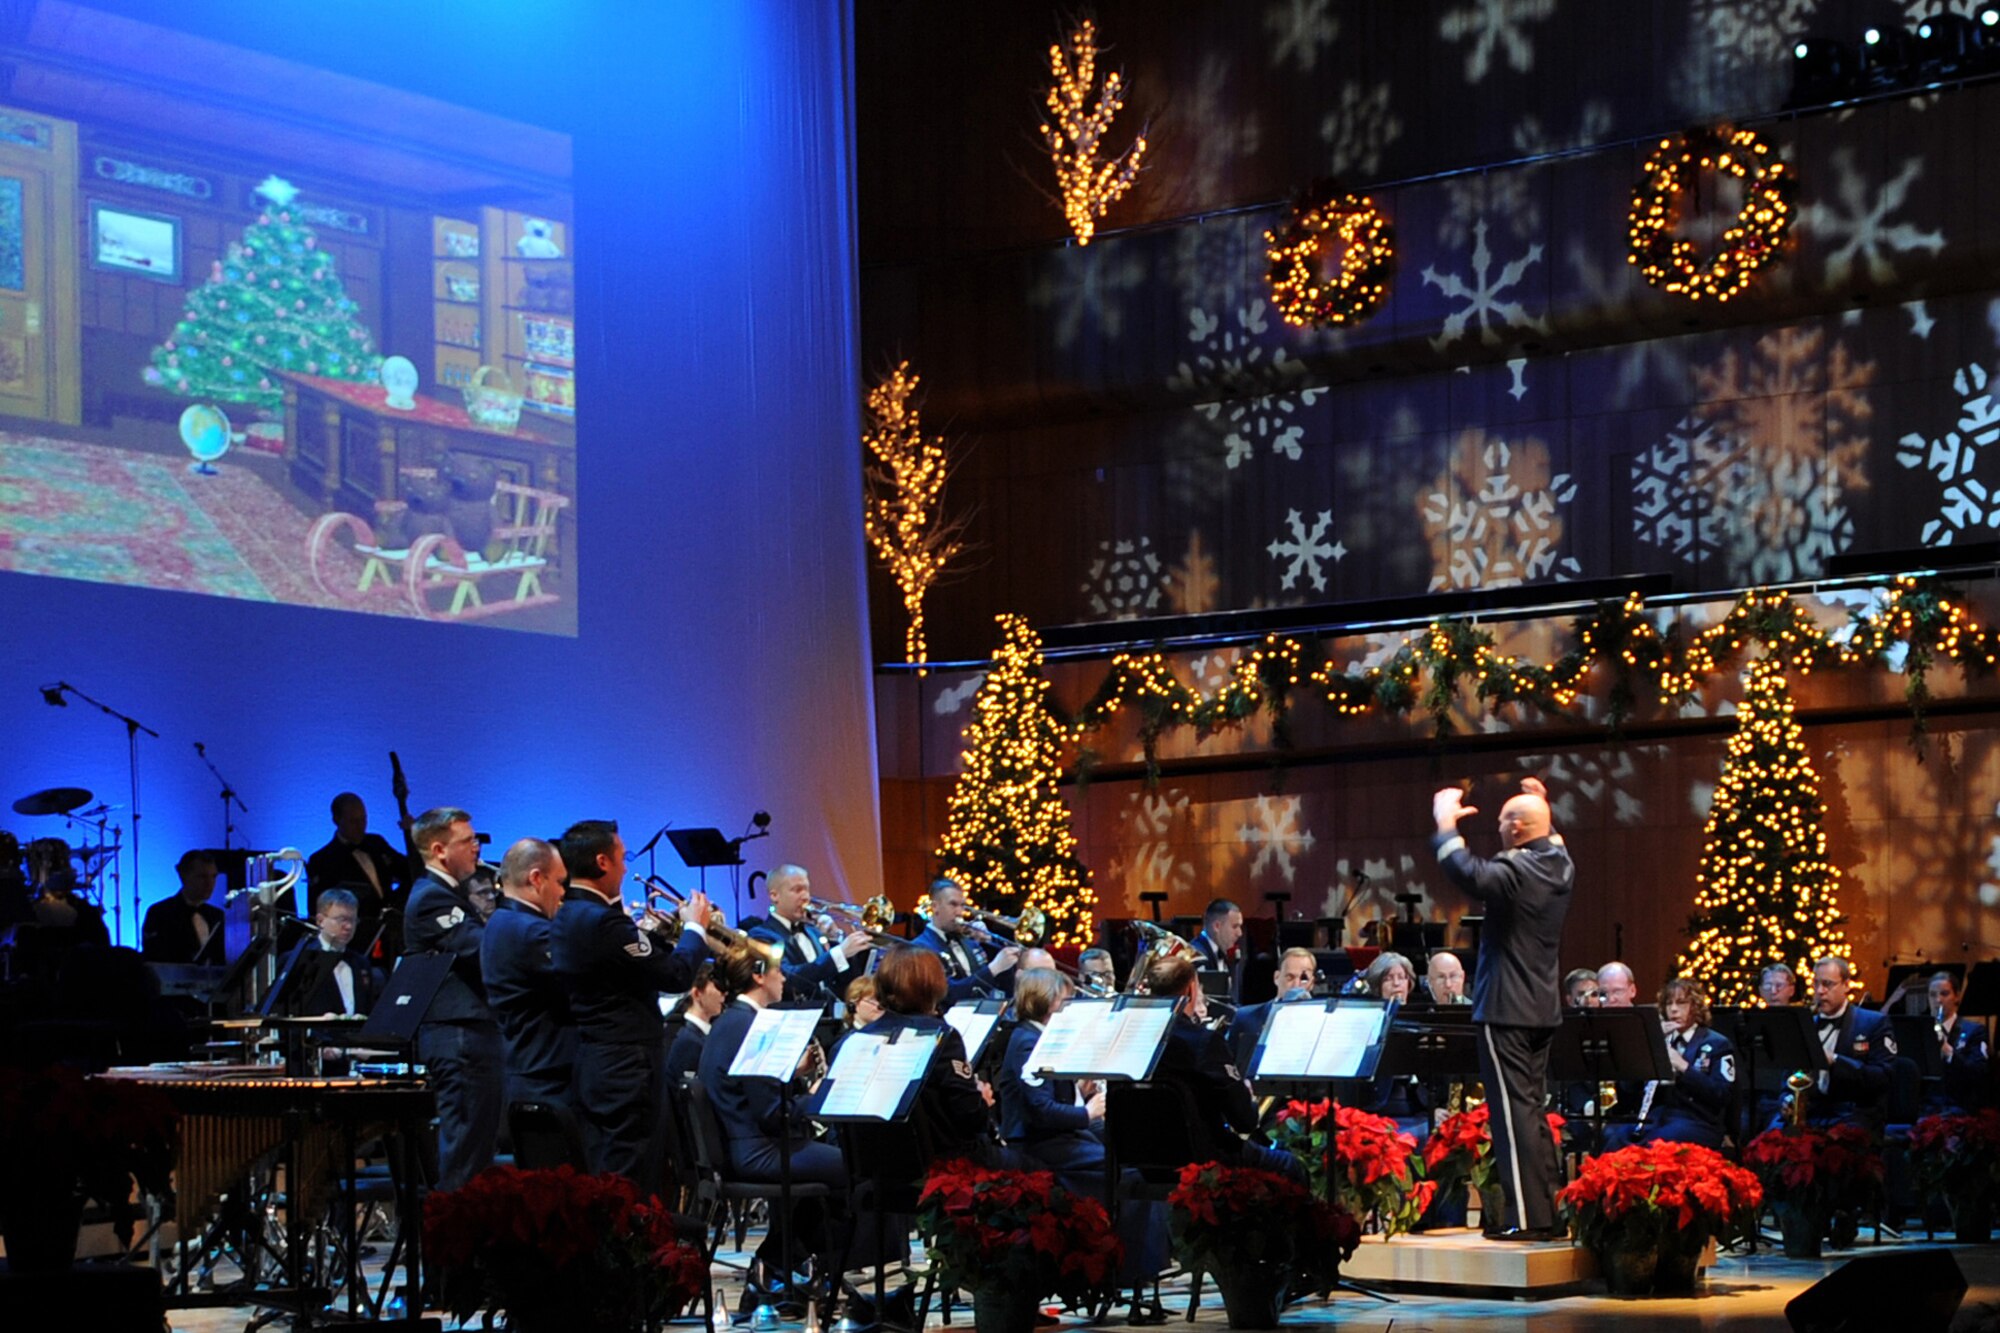 Members of the Heartland of America Band perform during "The Promise of the Season" holiday concert at the Holland Performing Arts Center Dec. 11. A special concert was performed for children from area schools. (U.S. Air Force Photo By Jeff Gates)